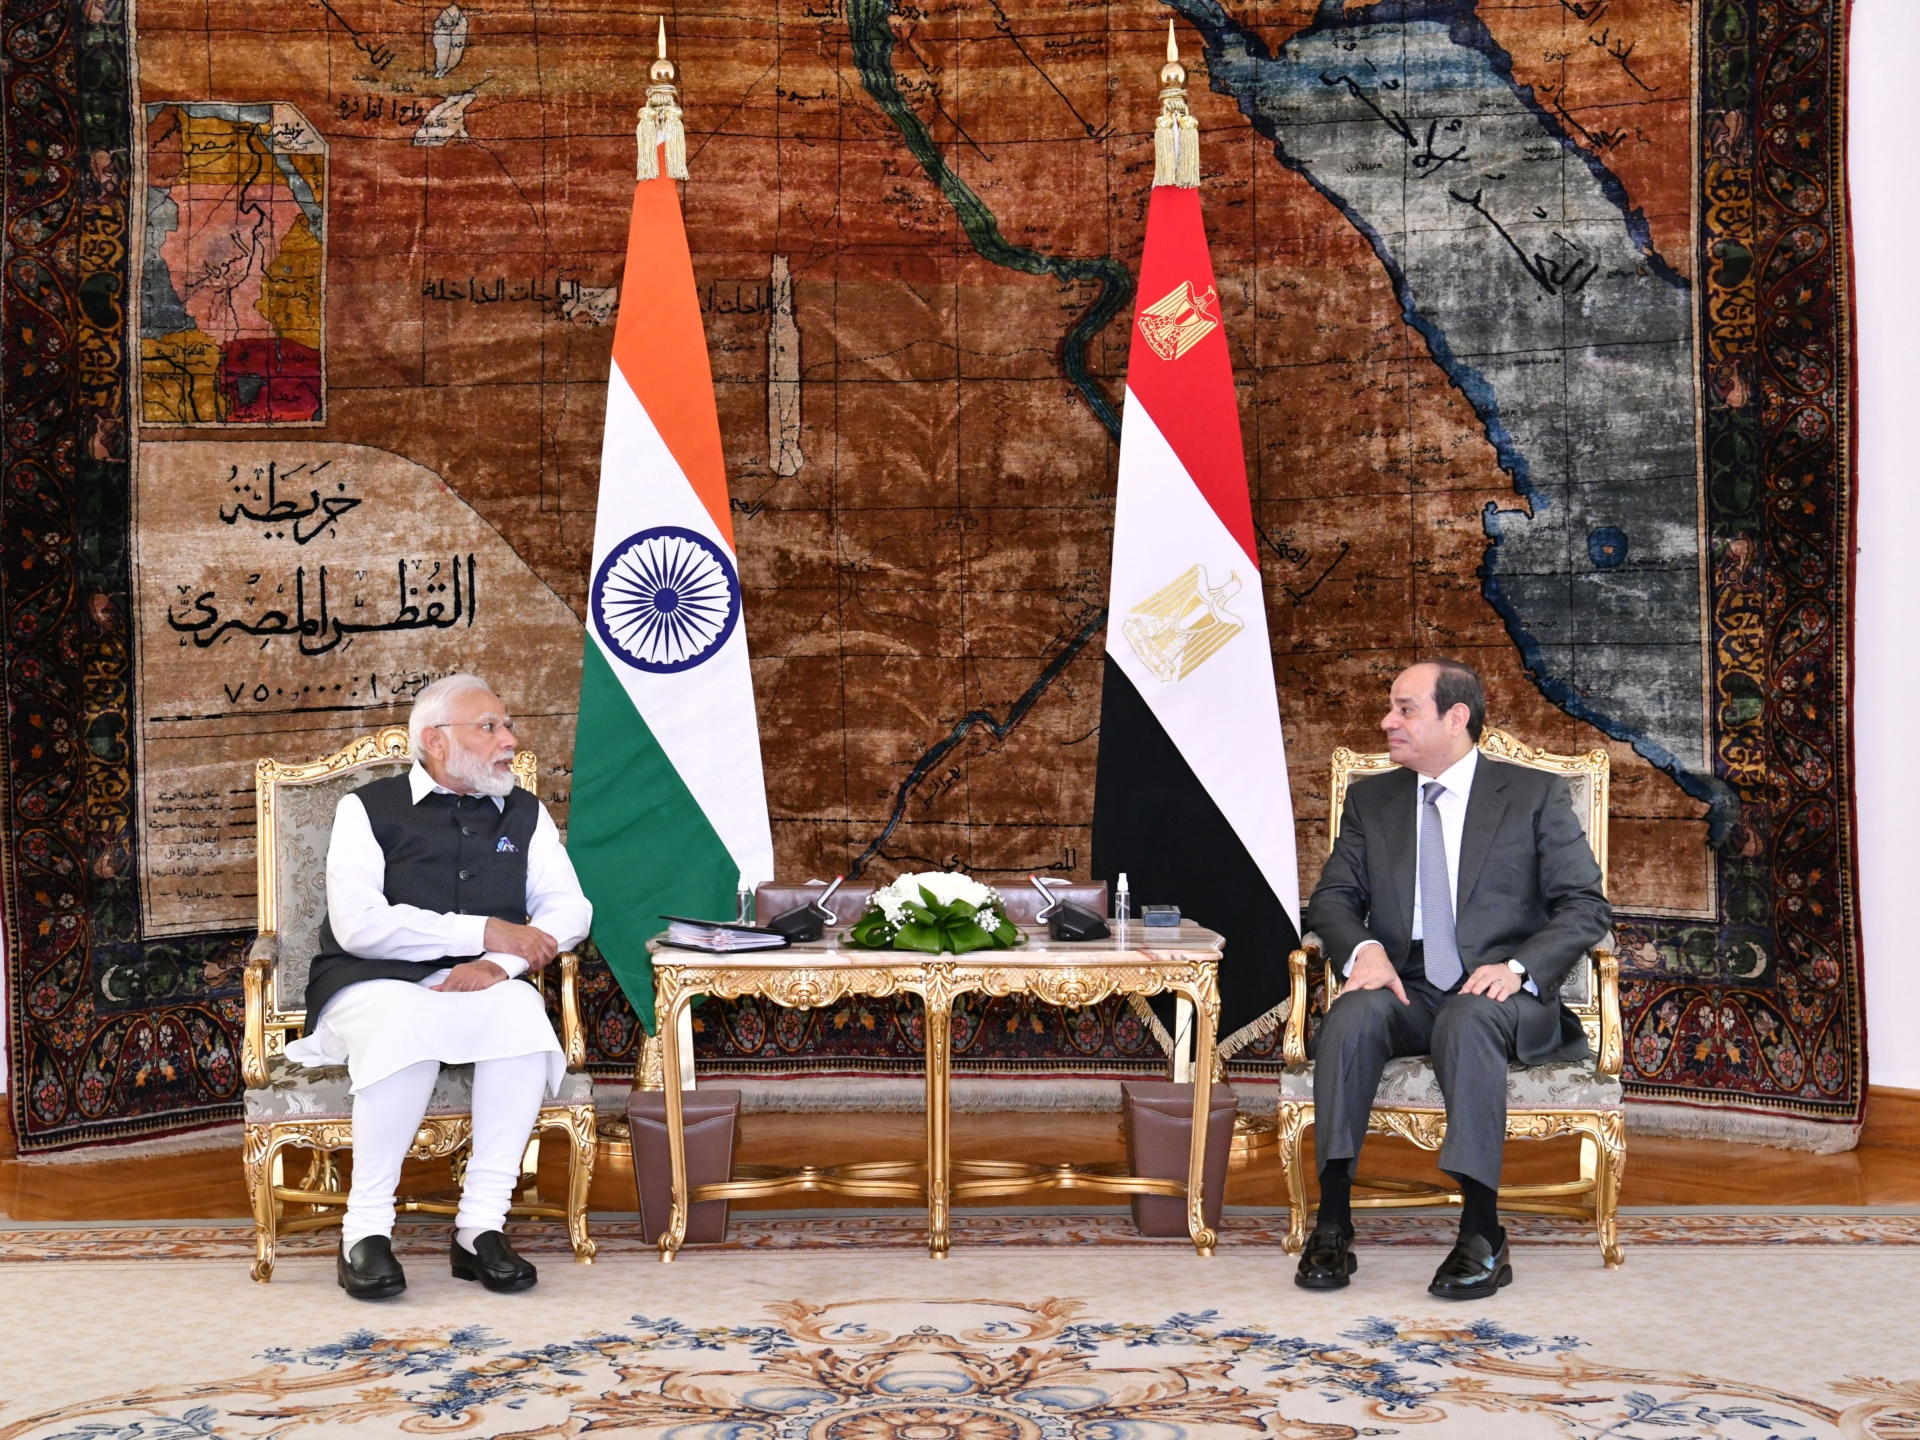 Egypt and India bolster ties as Modi makes first trip to Cairo